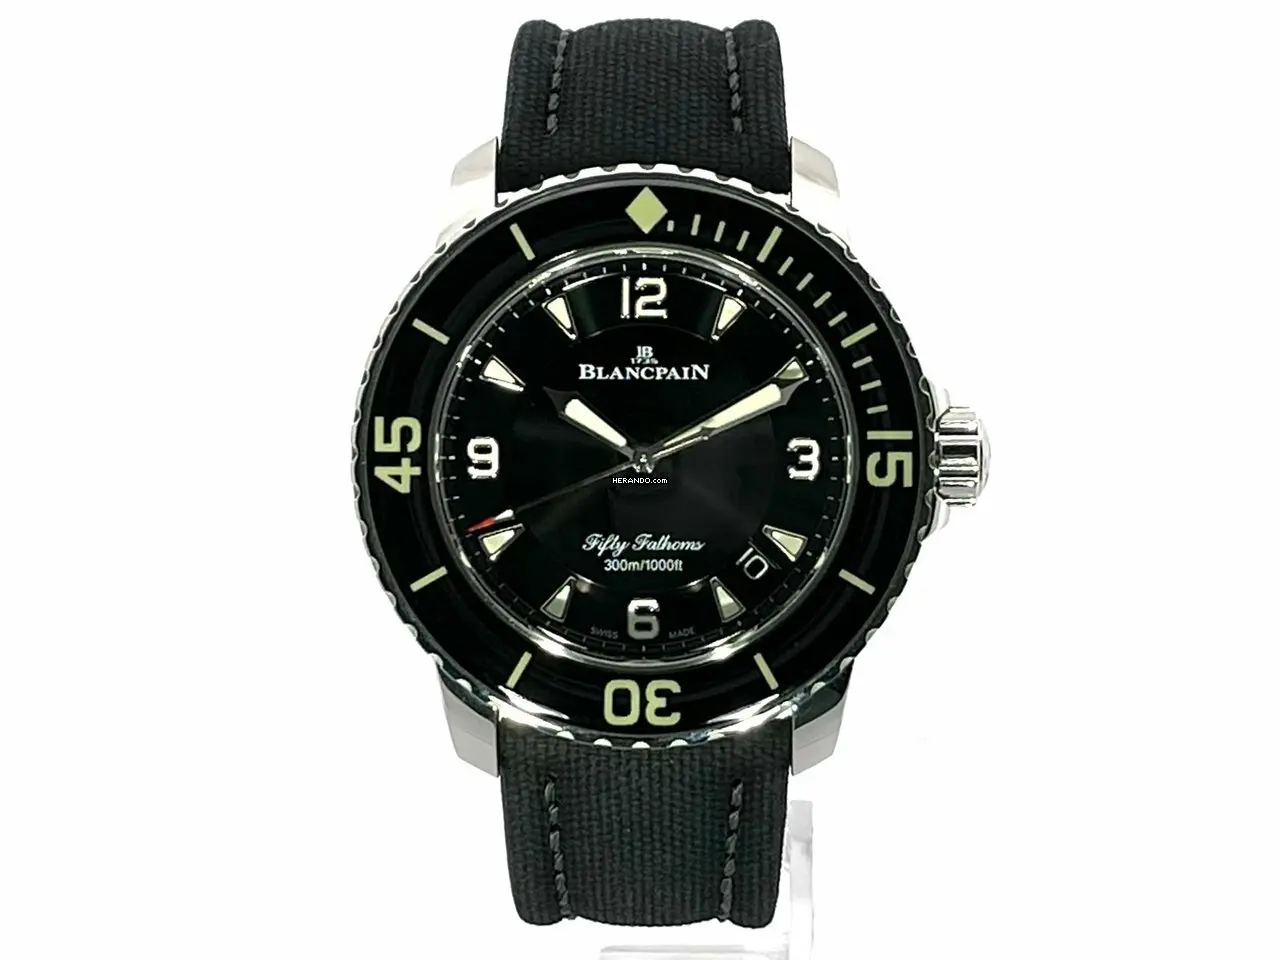 watches-37037-4989852-h1a43o05e9imy64myq46eu8x-ExtraLarge.webp